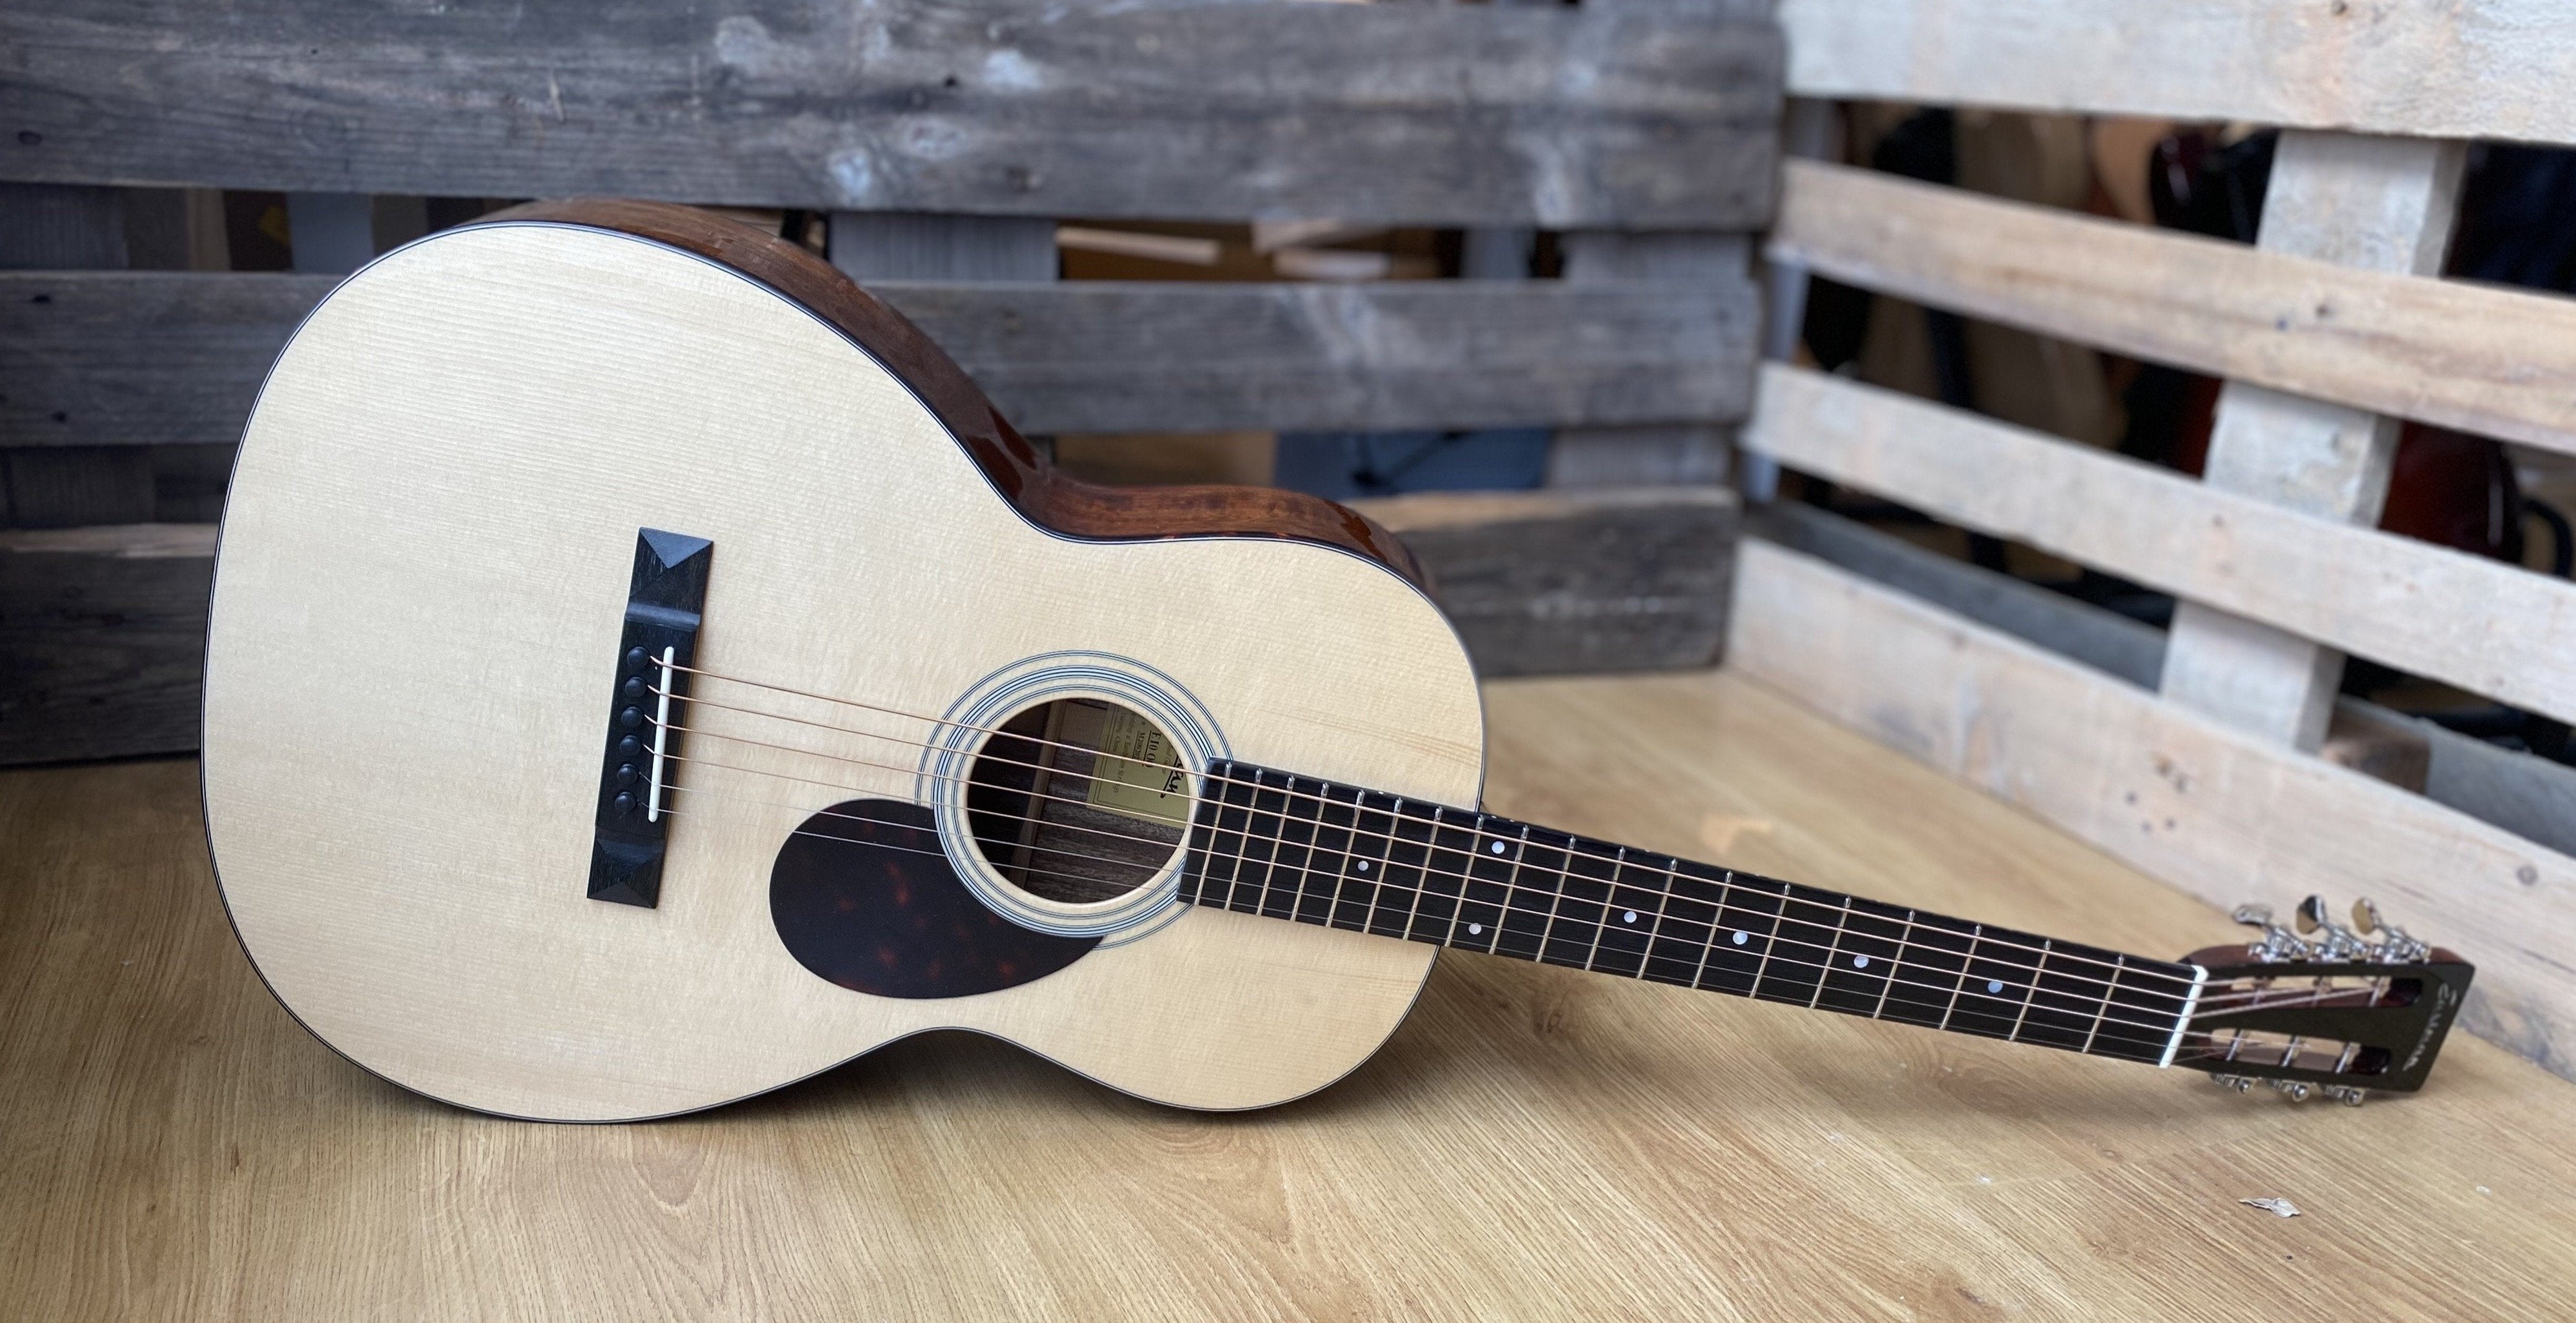 Eastman E10 OO Parlor Acoustic, Acoustic Guitar for sale at Richards Guitars.